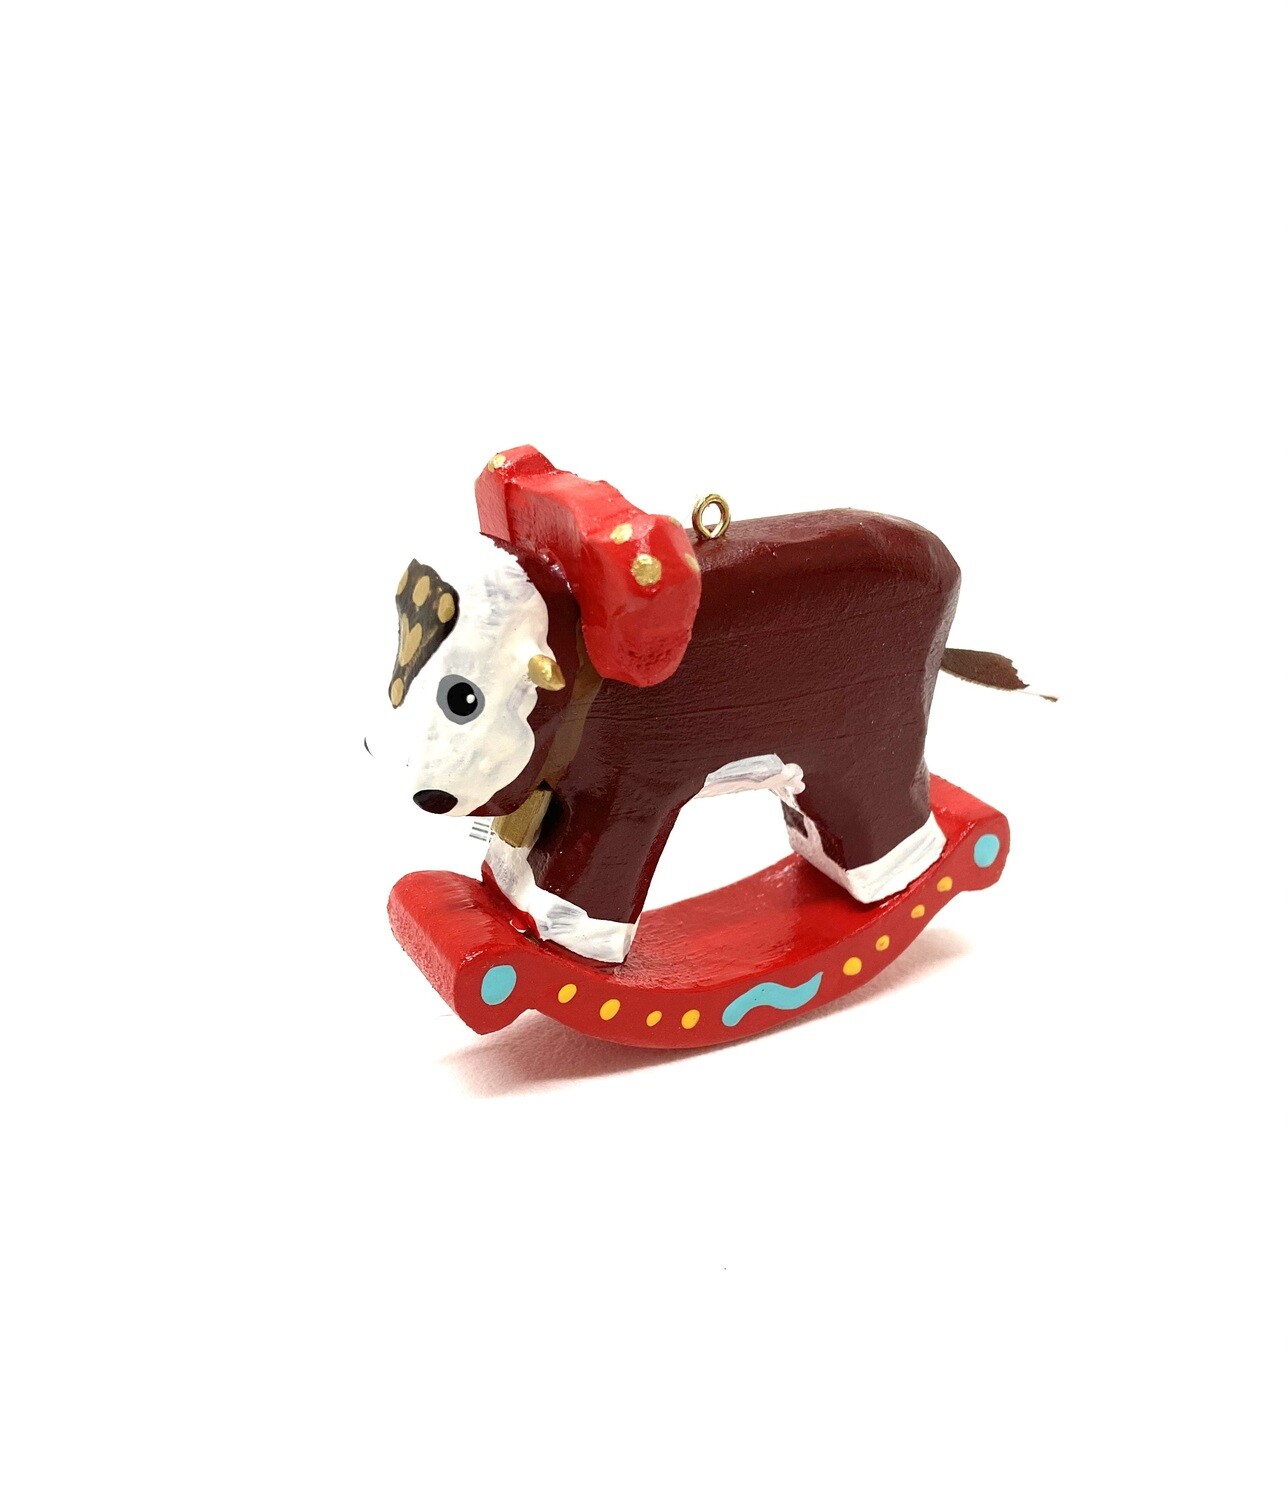 Rocking Ox Ornament- Timberdoodle